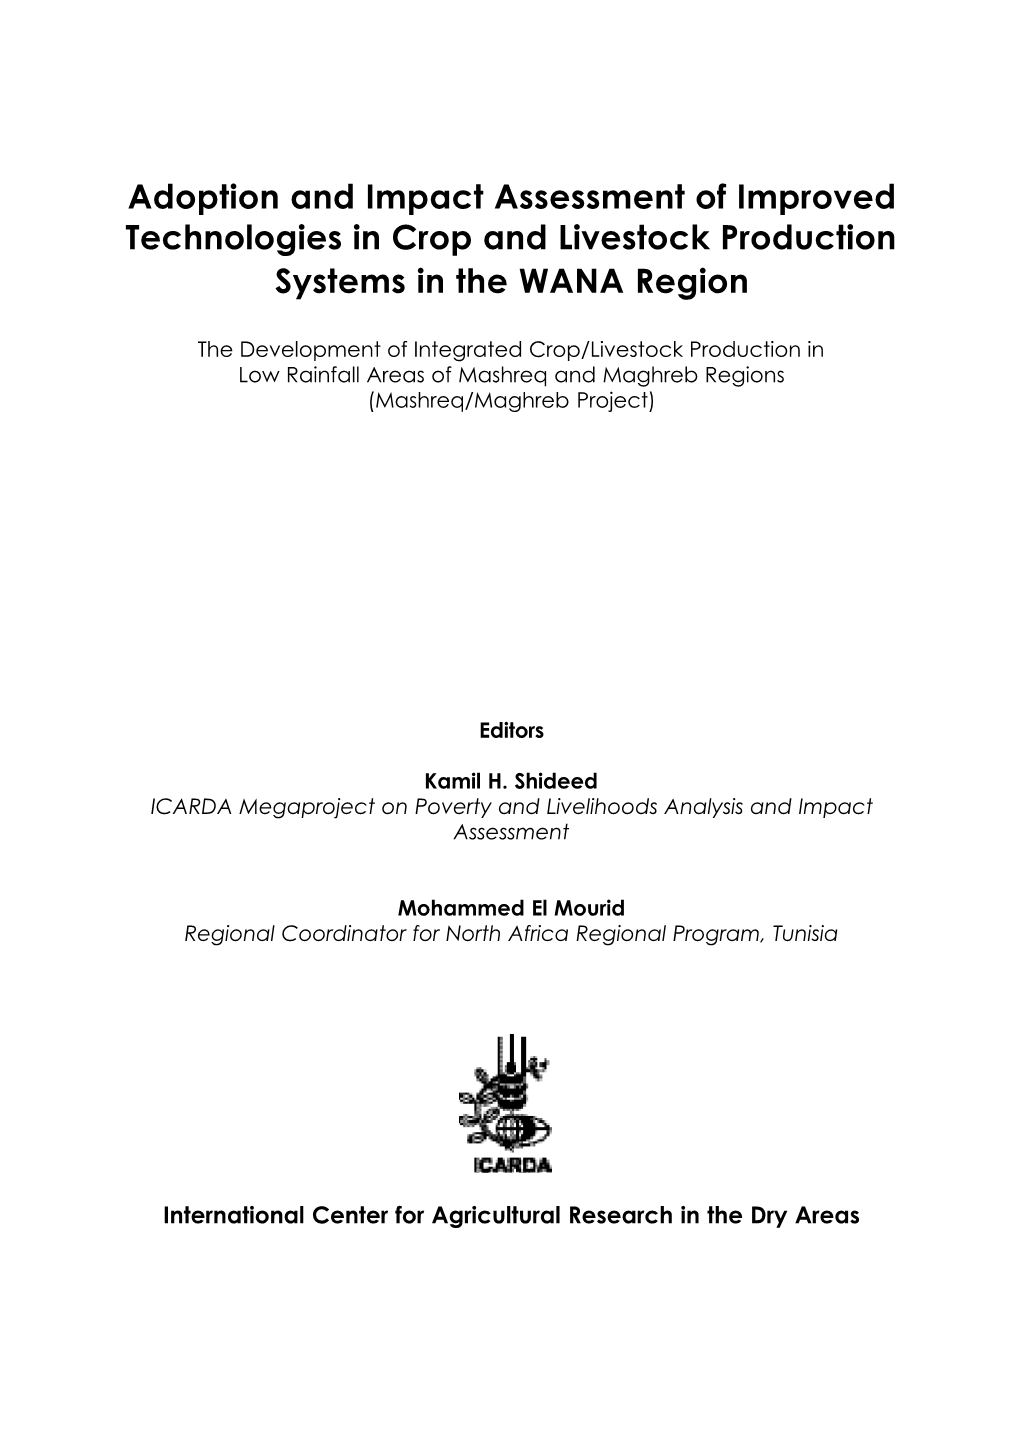 Adoption and Impact Assessment of Improved Technologies in Crop and Livestock Production Systems in the WANA Region